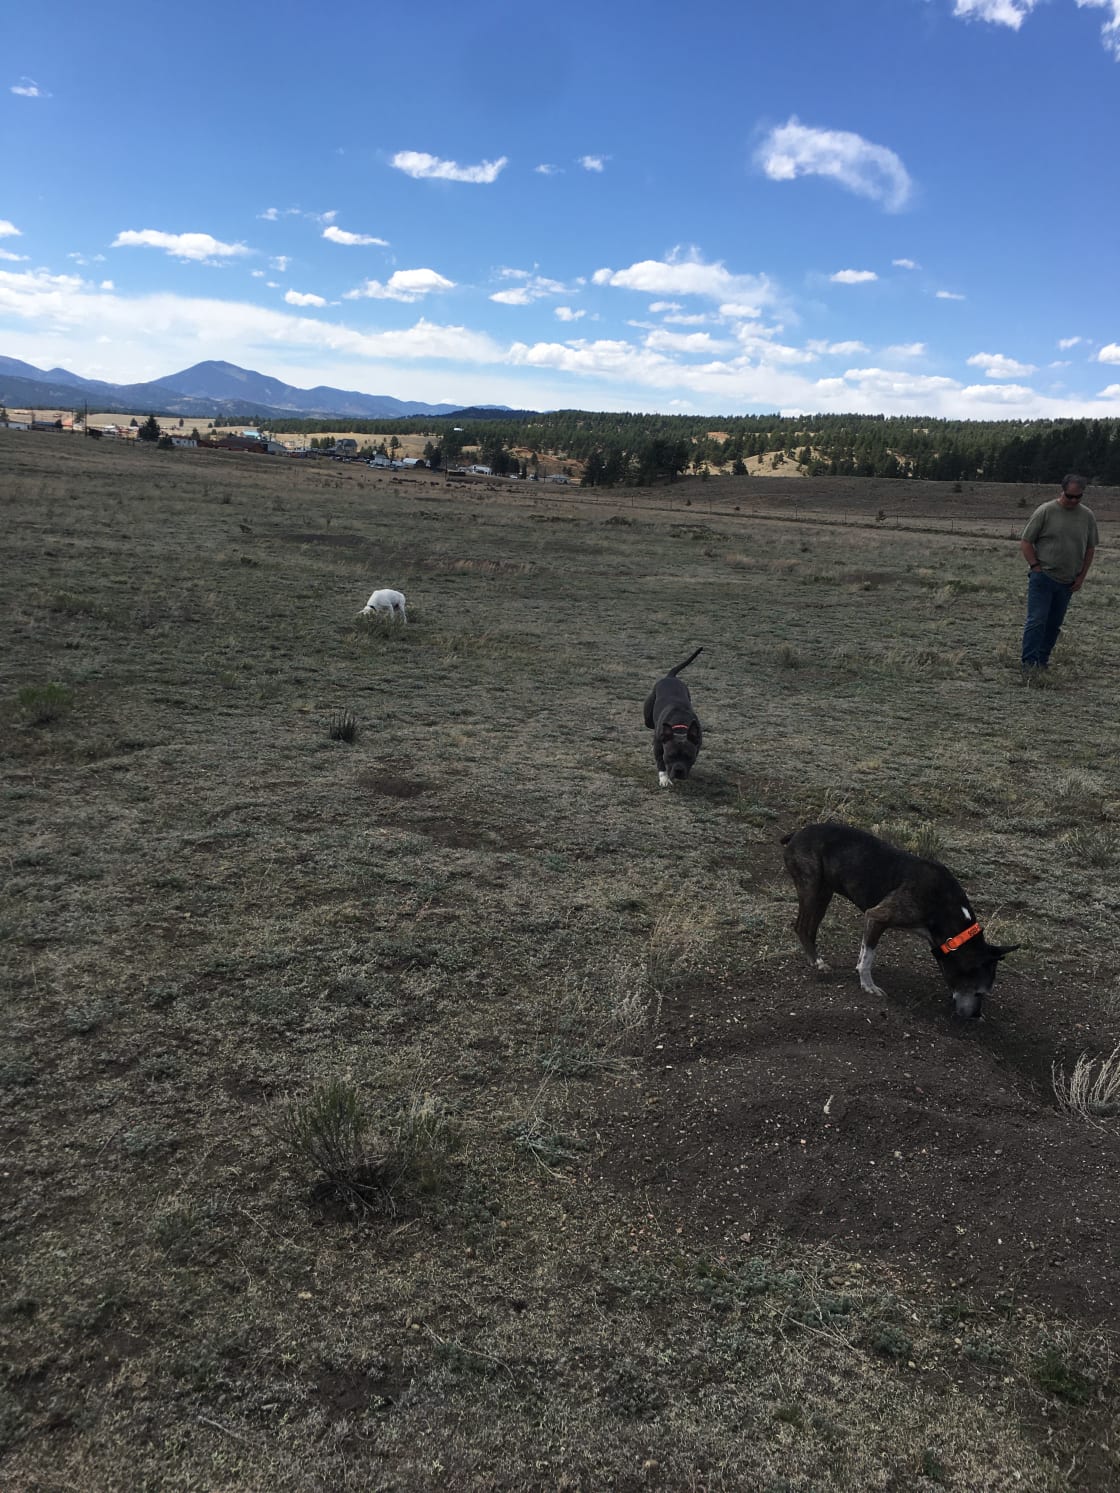 Our dogs loved running through the open field and checking out prairie dog holes.